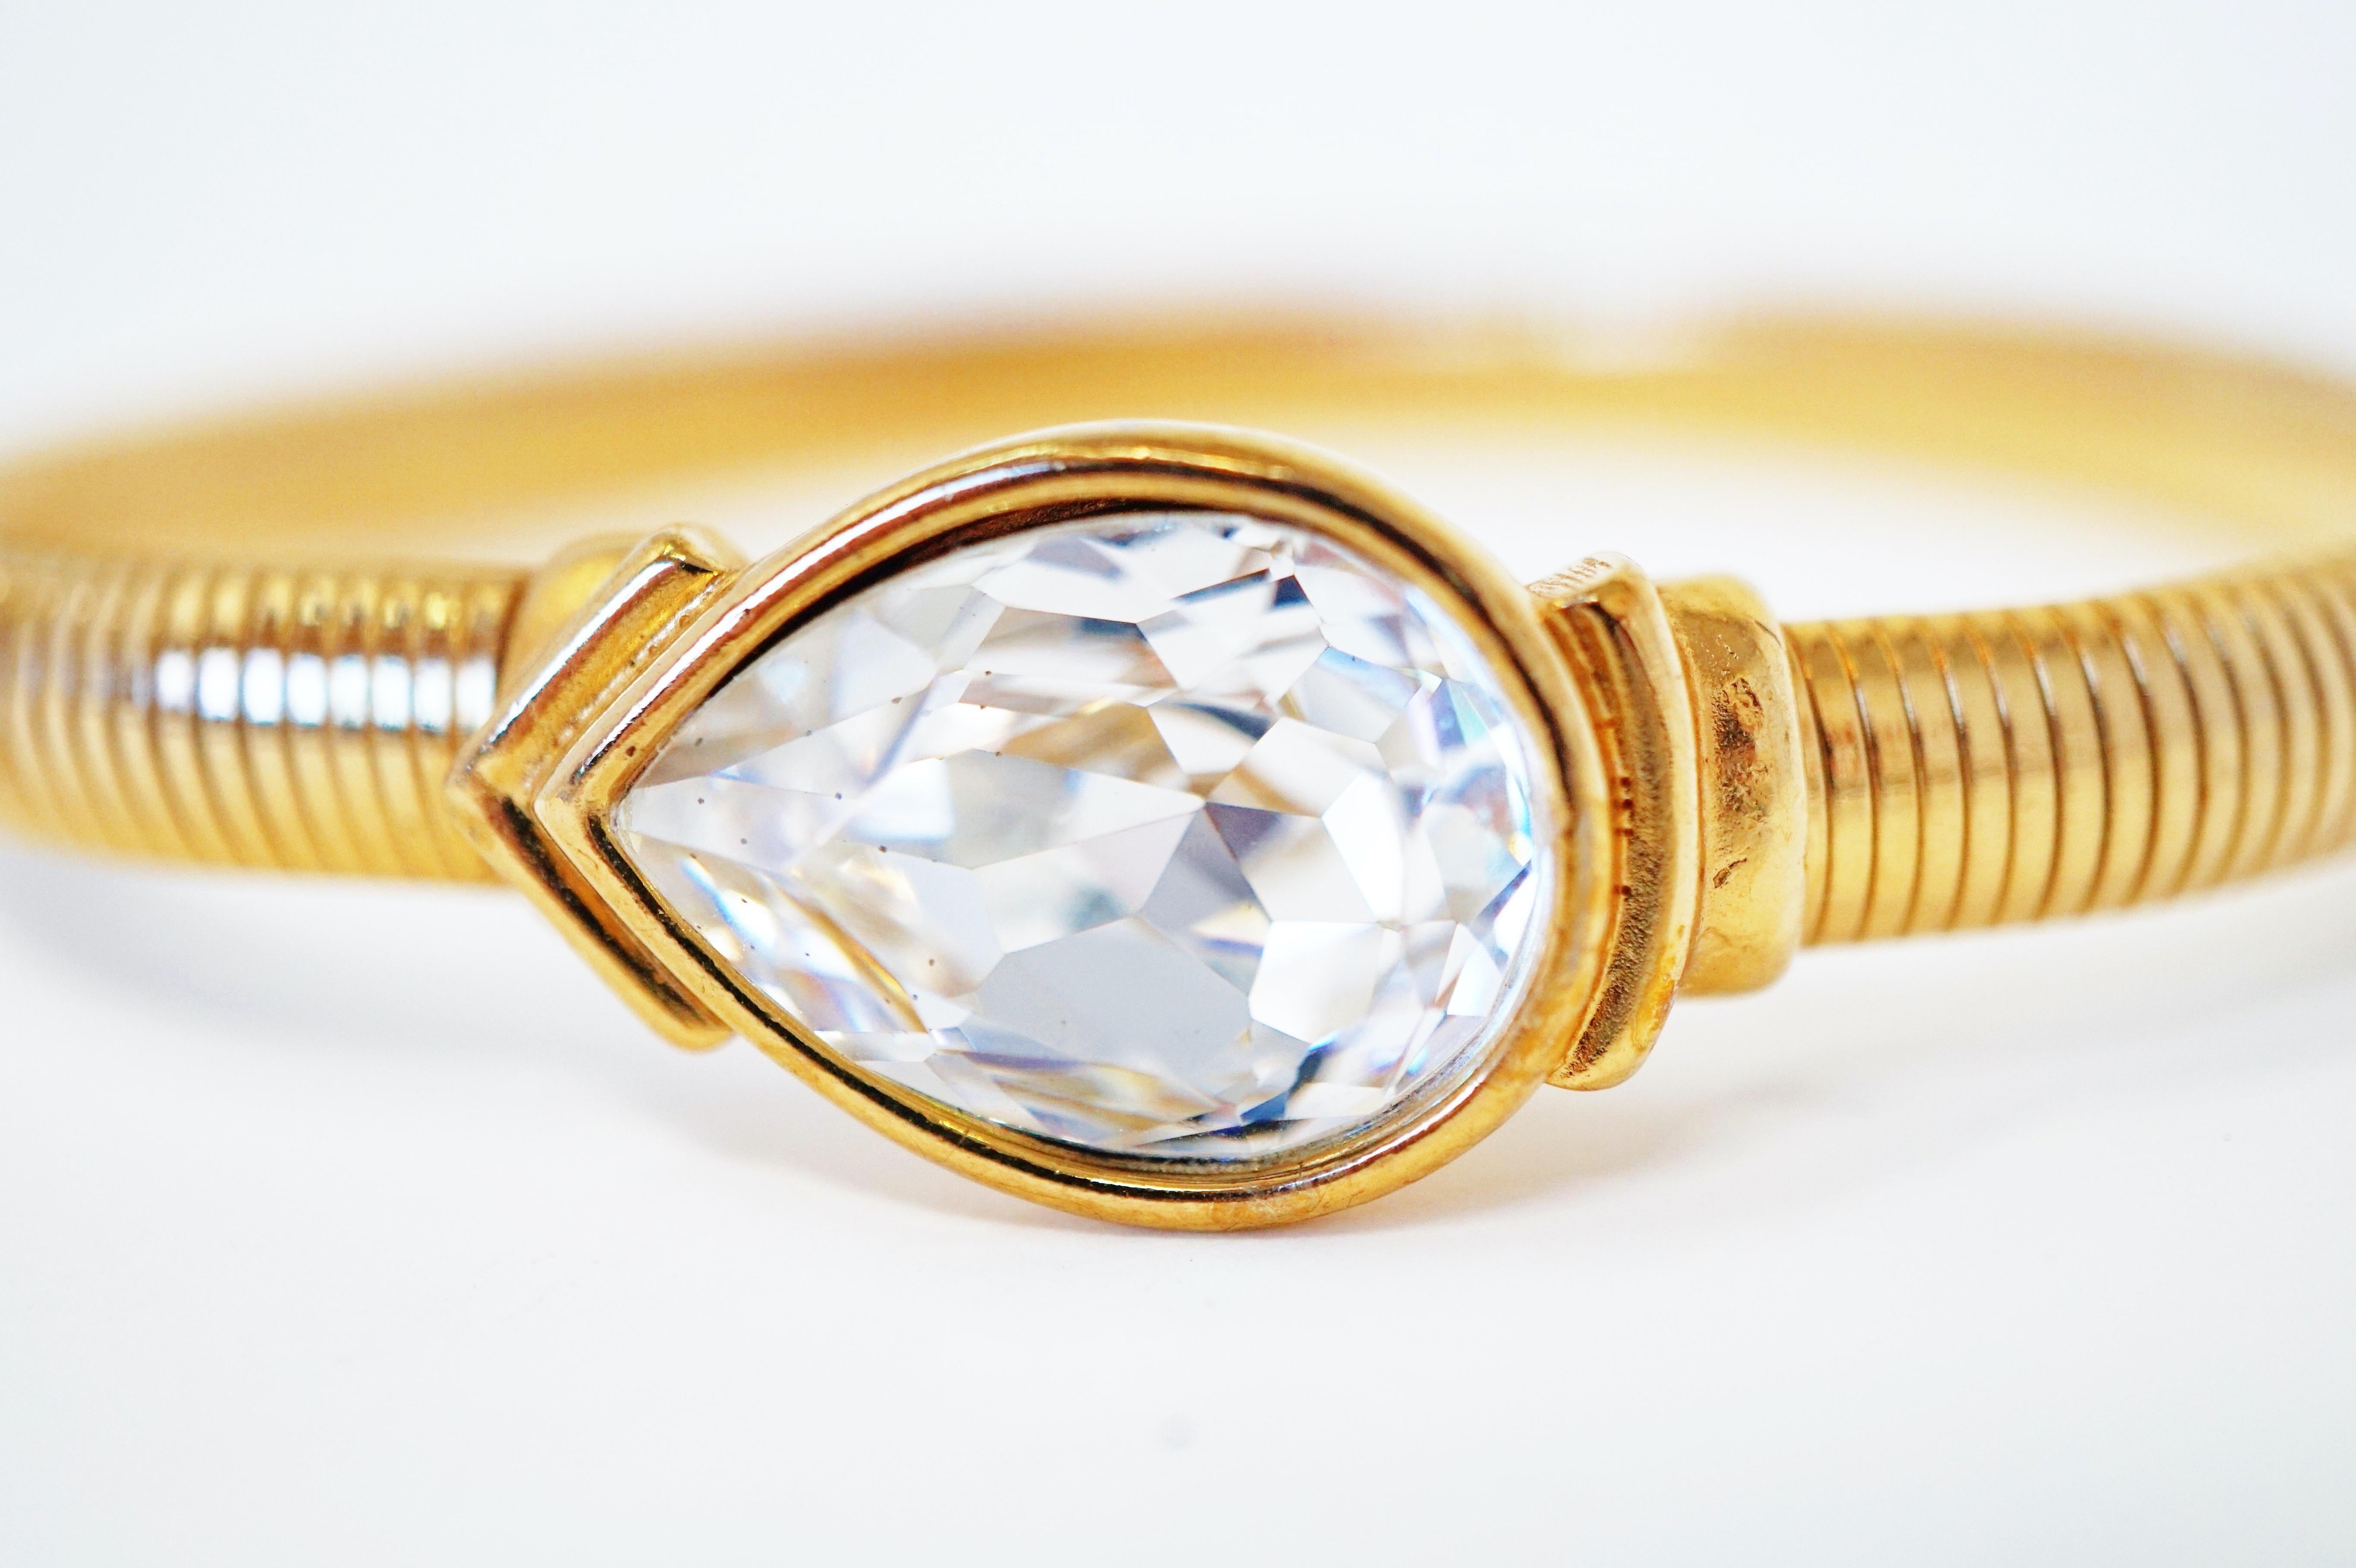 This gorgeous 1980's Trifari bracelet is a wonderful addition to your costume jewelry collection. This easy-to-wear piece features a large faceted pear shaped Swarovski crystal and is a great way to add some sparkle and personality to your everyday